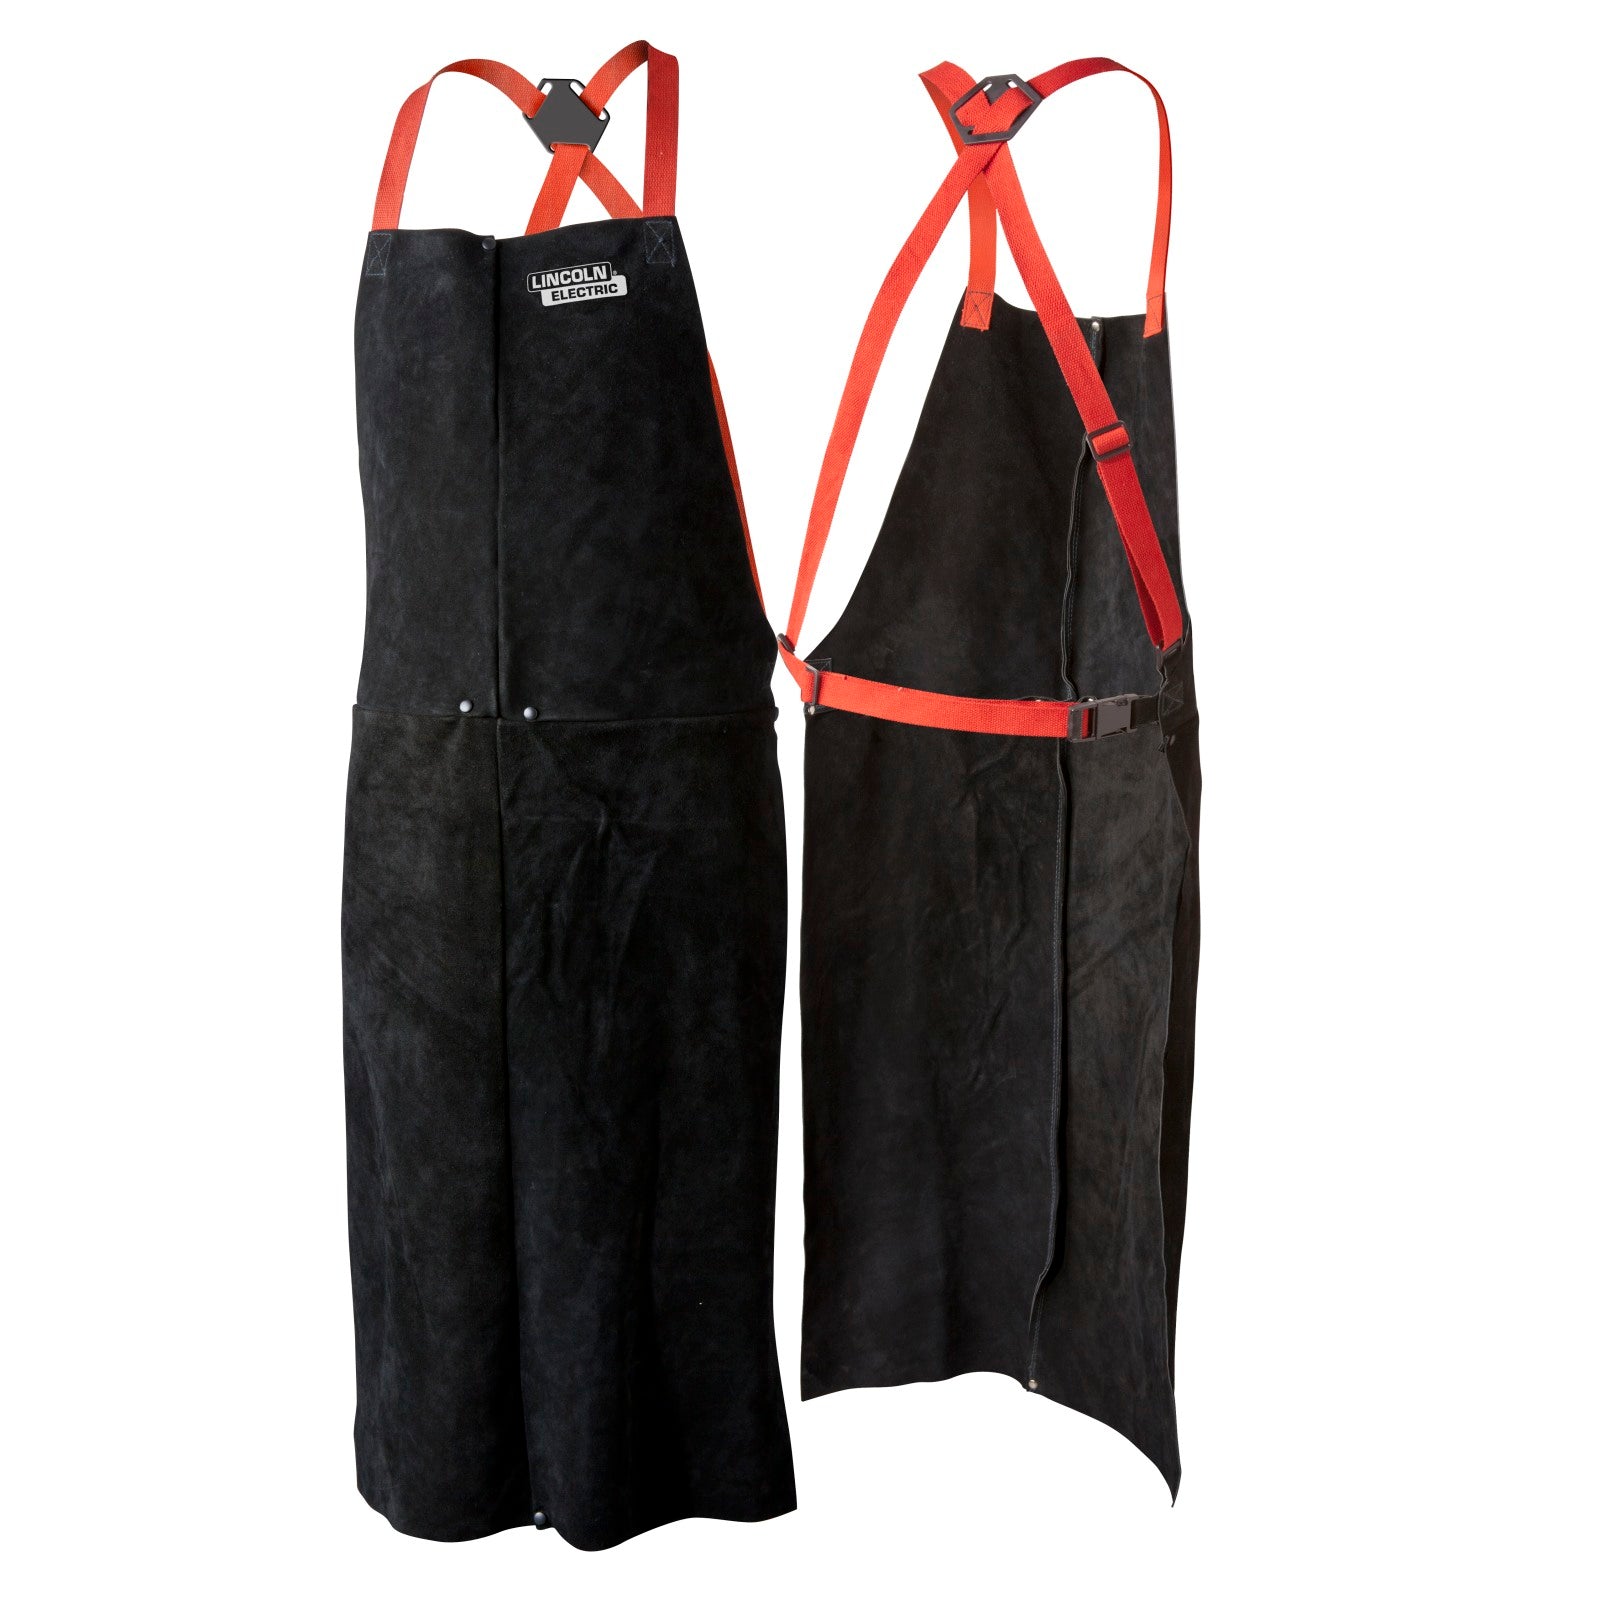 Lincoln Split Leather Apron - One Size (K3110-ALL)